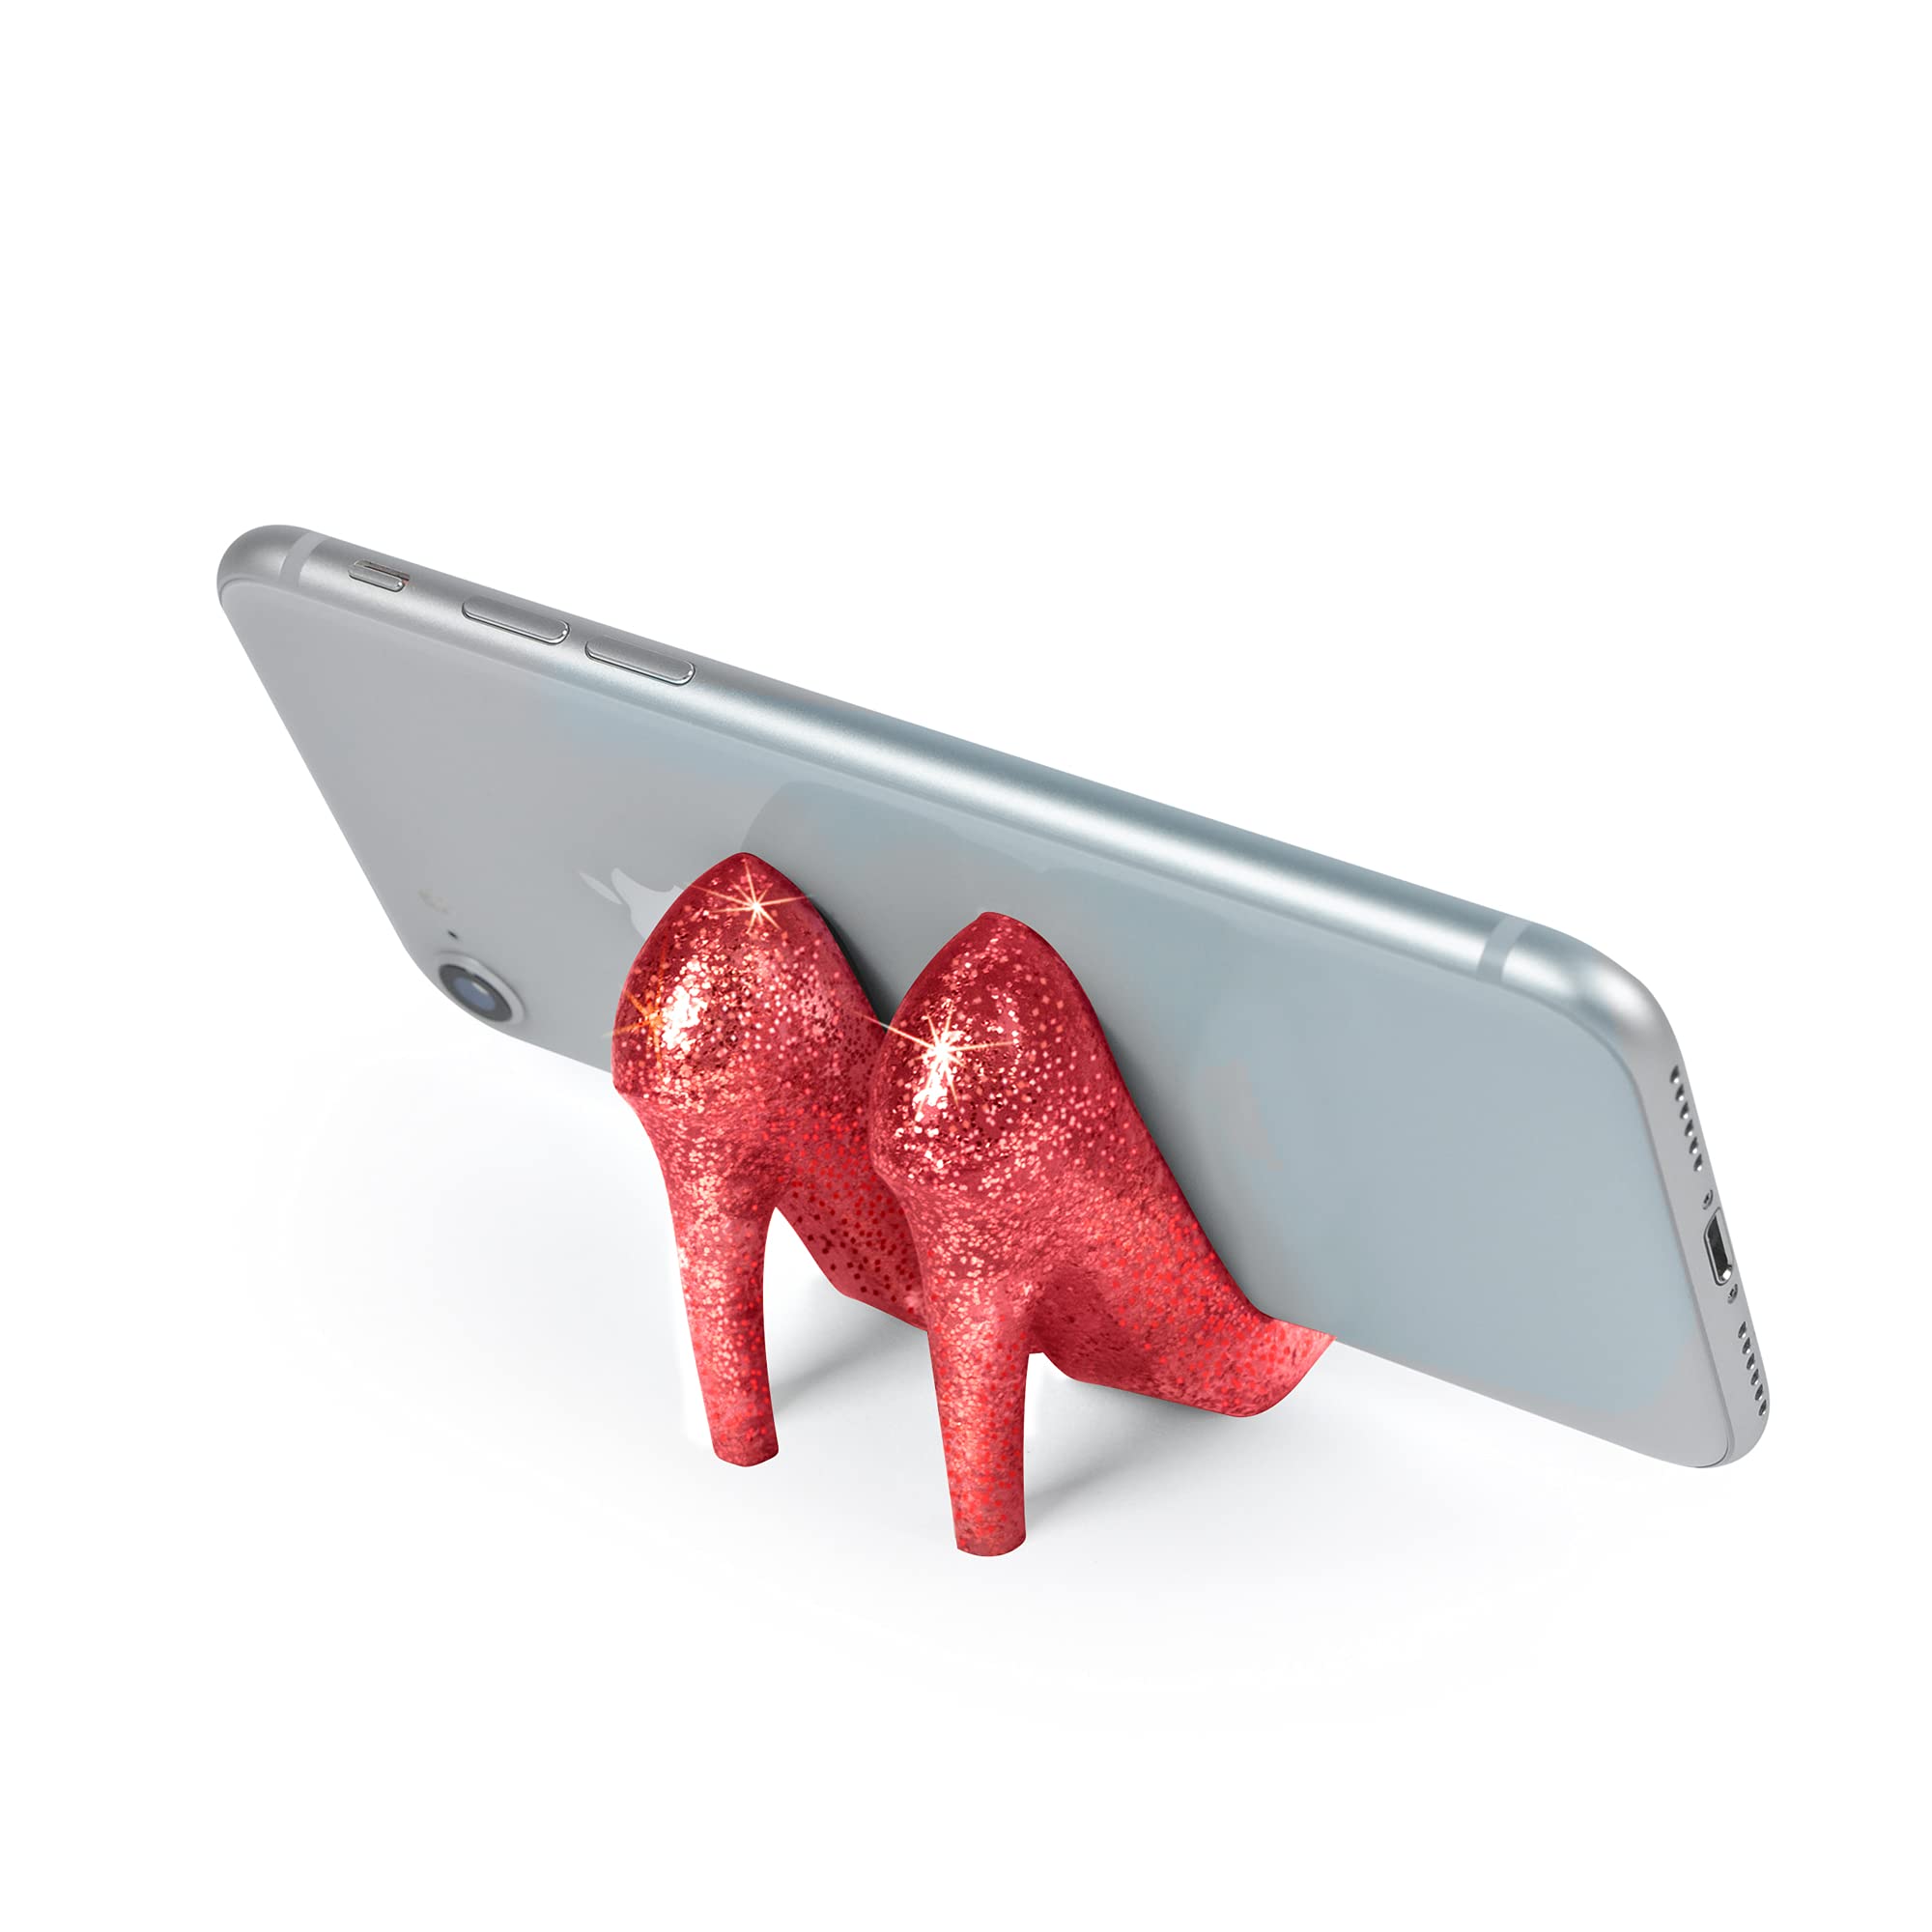 Genuine Fred 5216323 PUMPED UP High Heel Shoe Phone Stand, Ruby Red